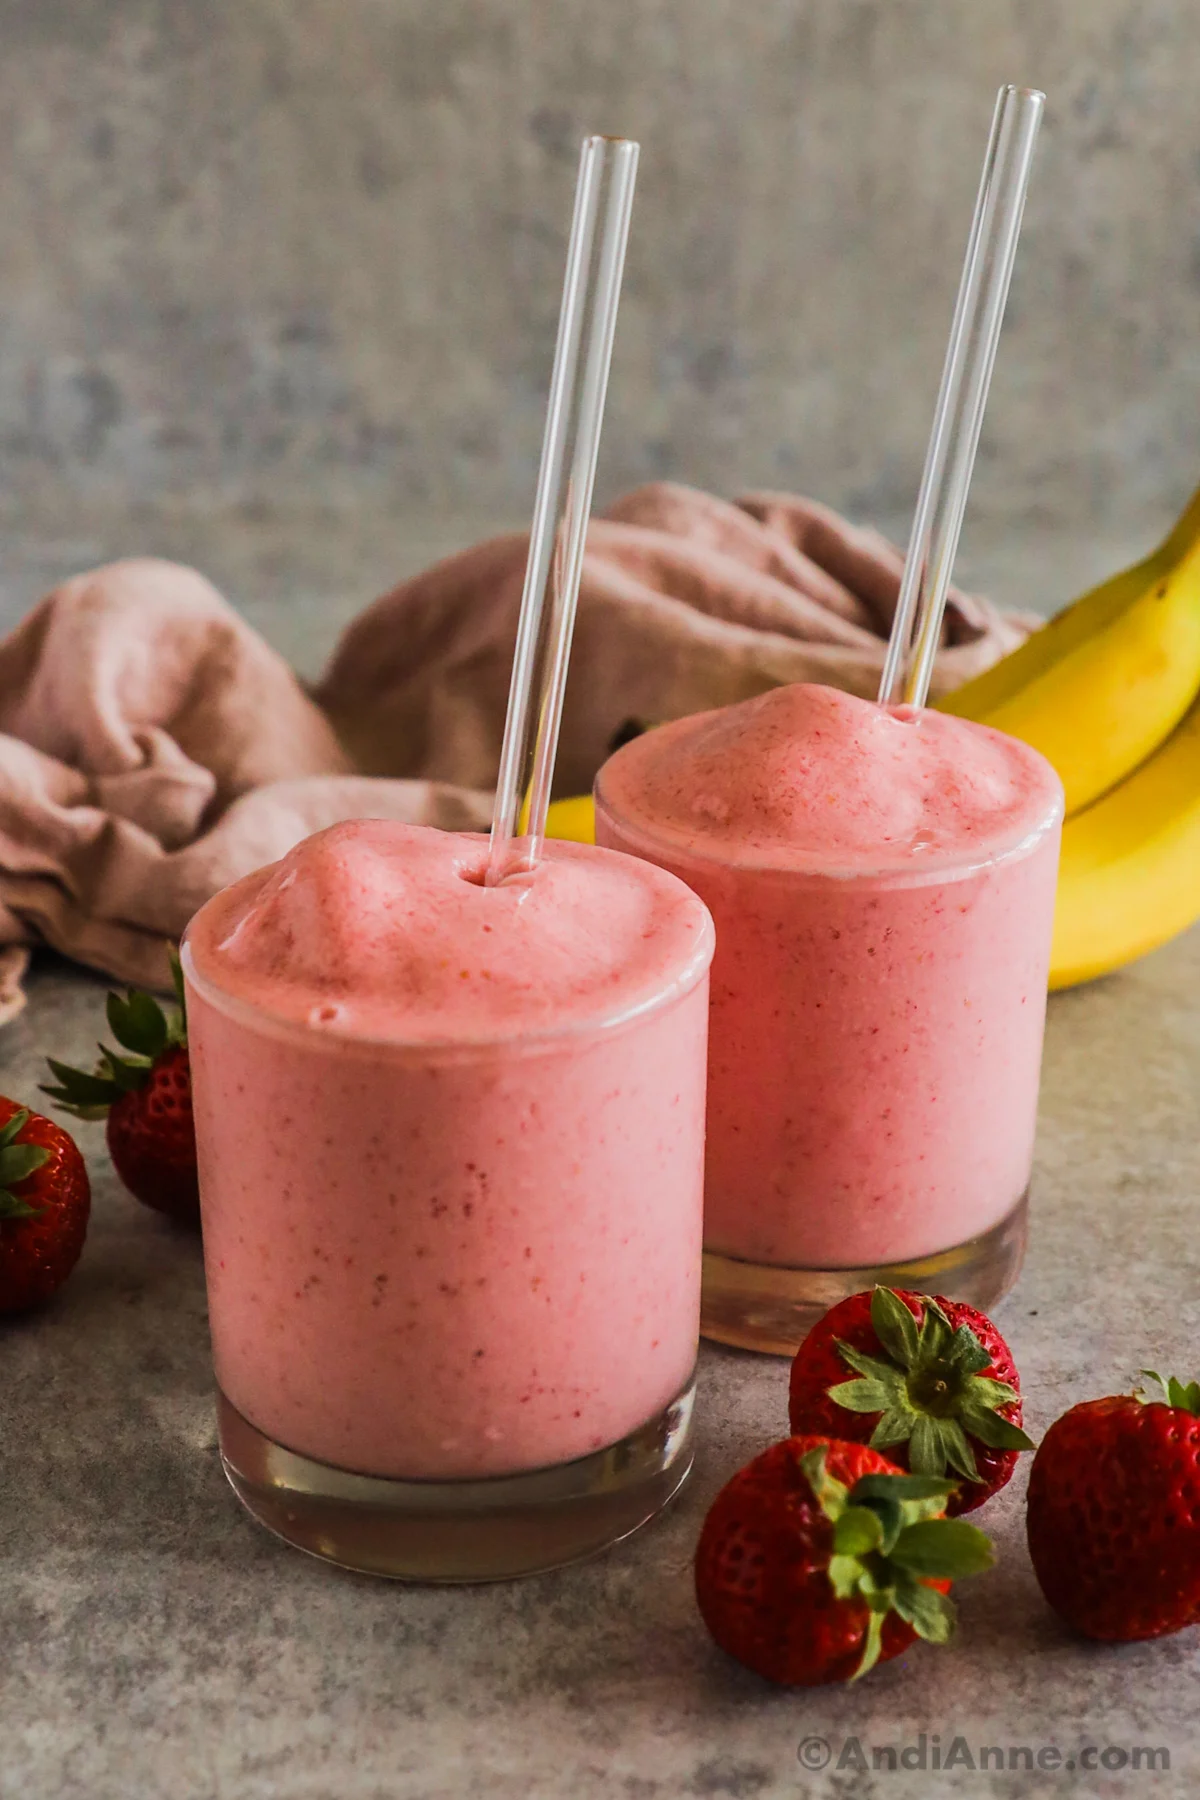 Two glasses of strawberry banana smoothie with straws surrounded by bananas and fresh strawberries.